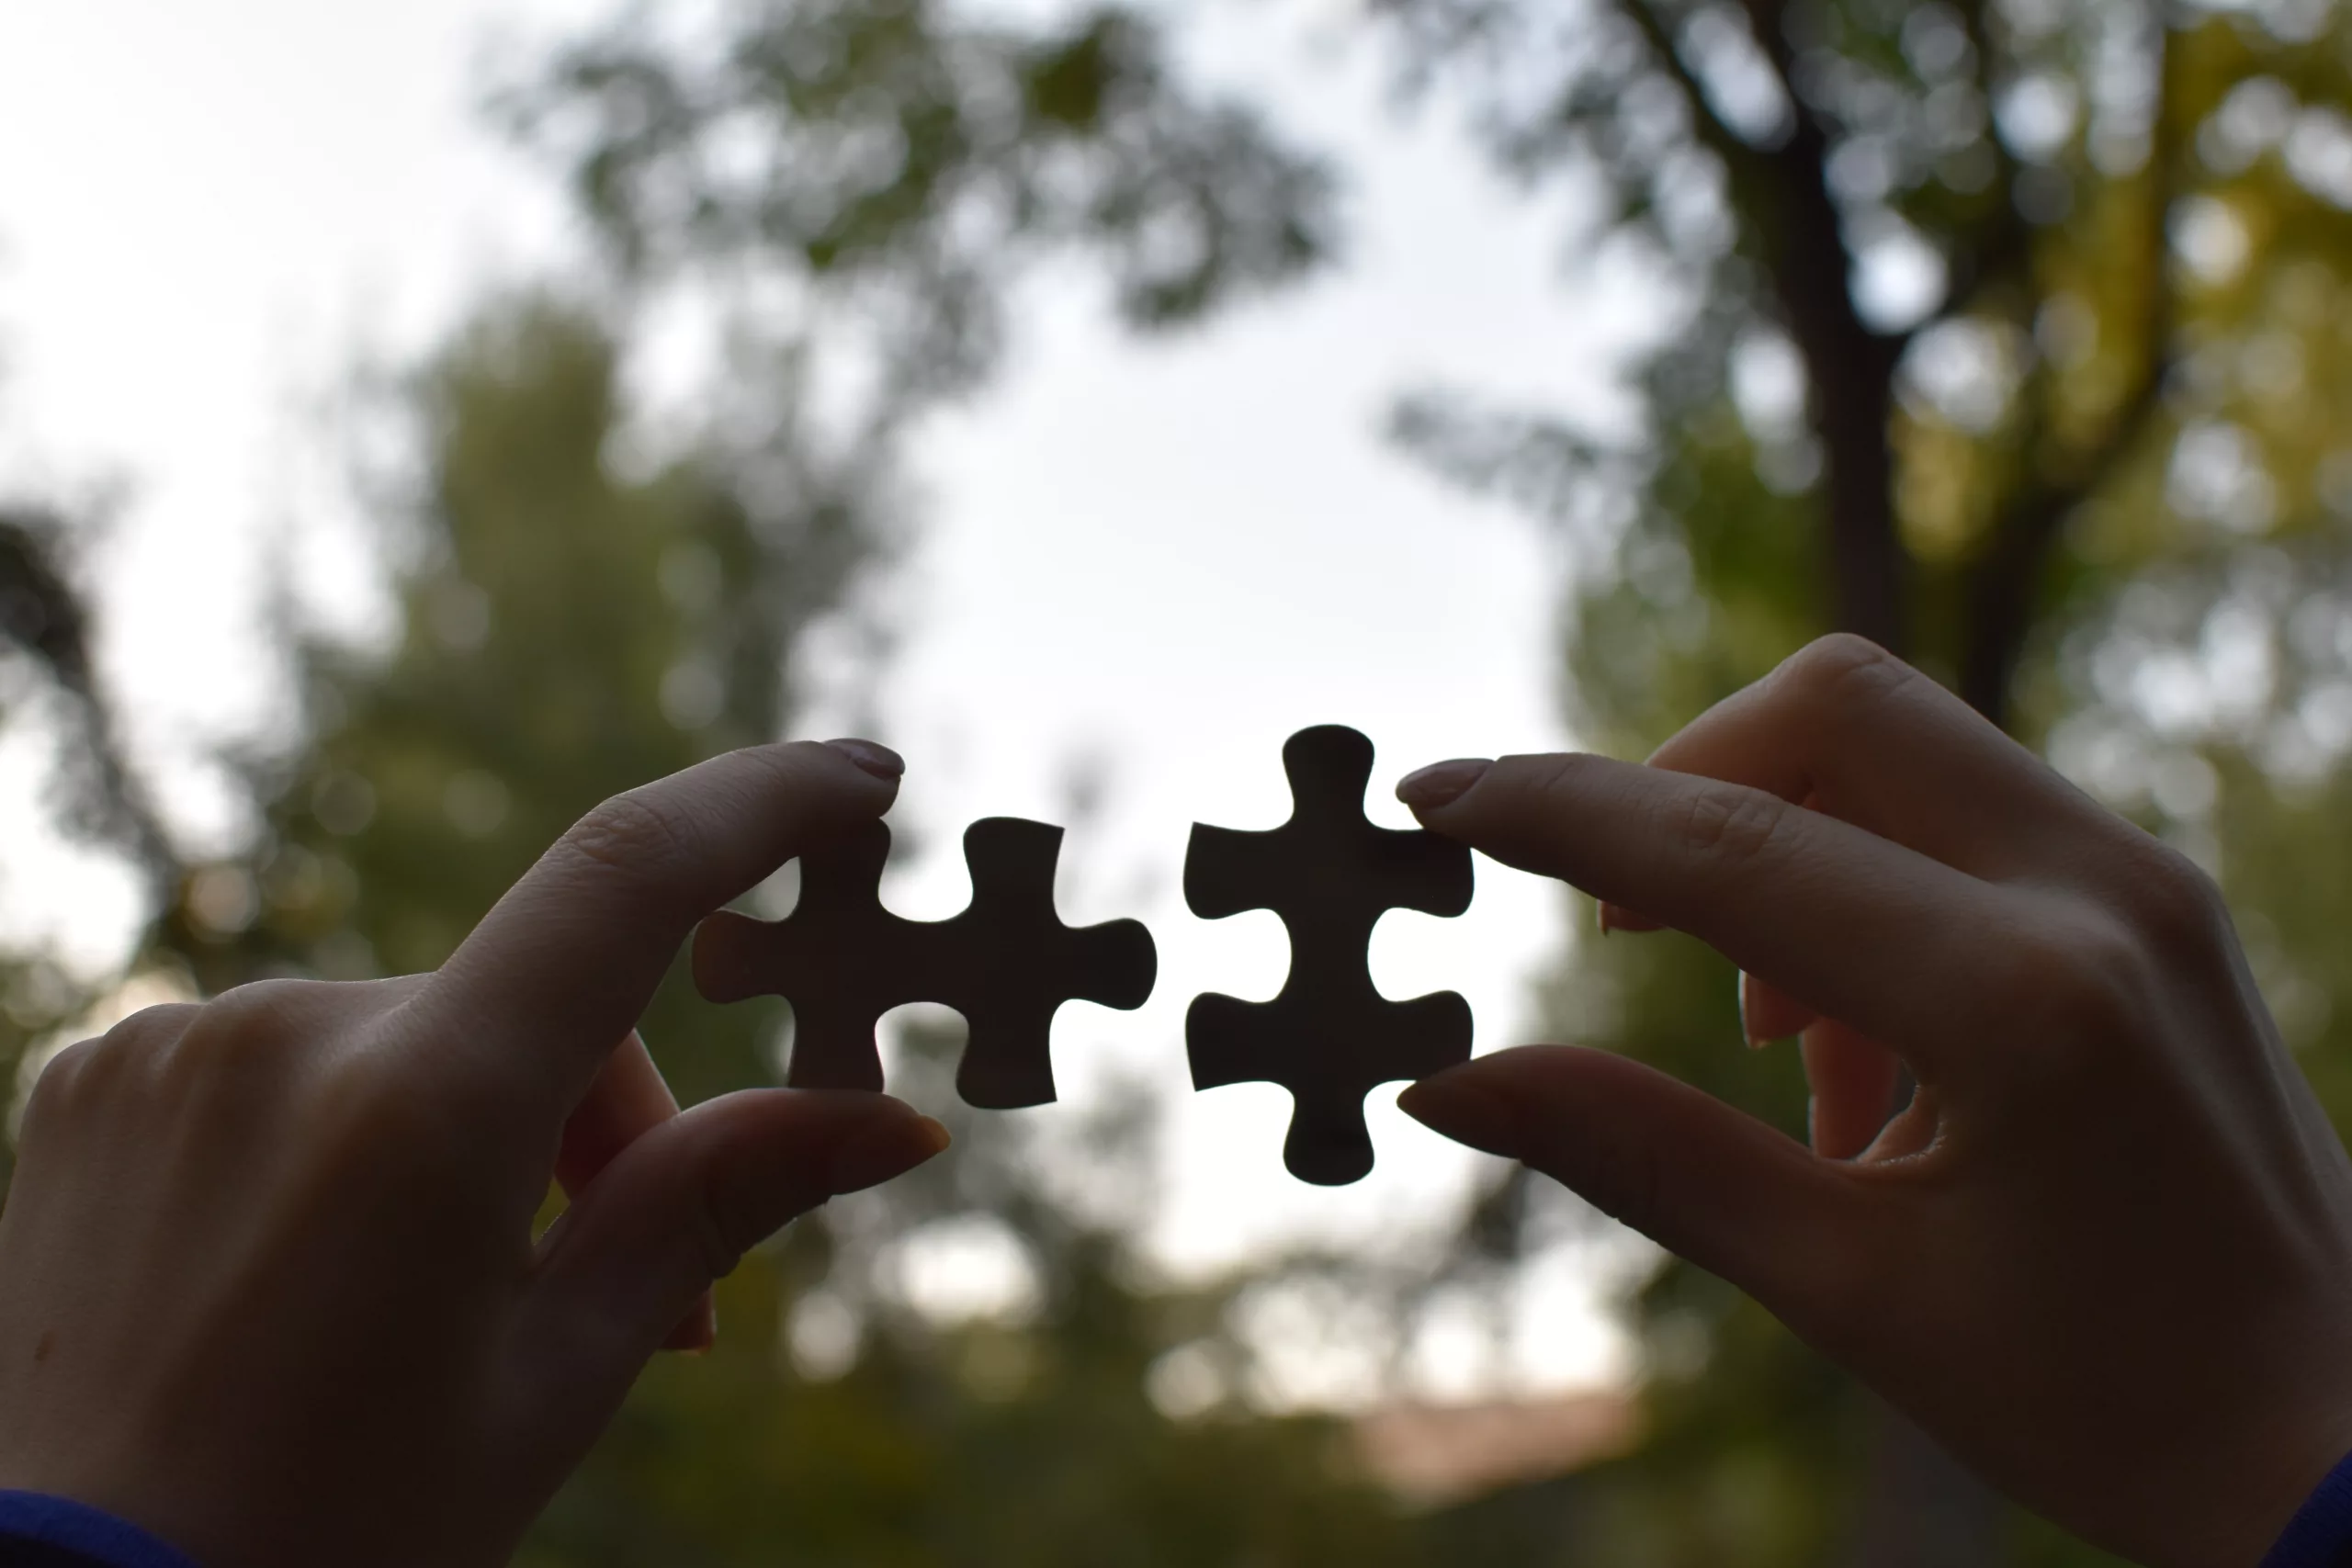 Two hands holding up two puzzle pieces side by side in front of a backdrop of the sky and some trees.